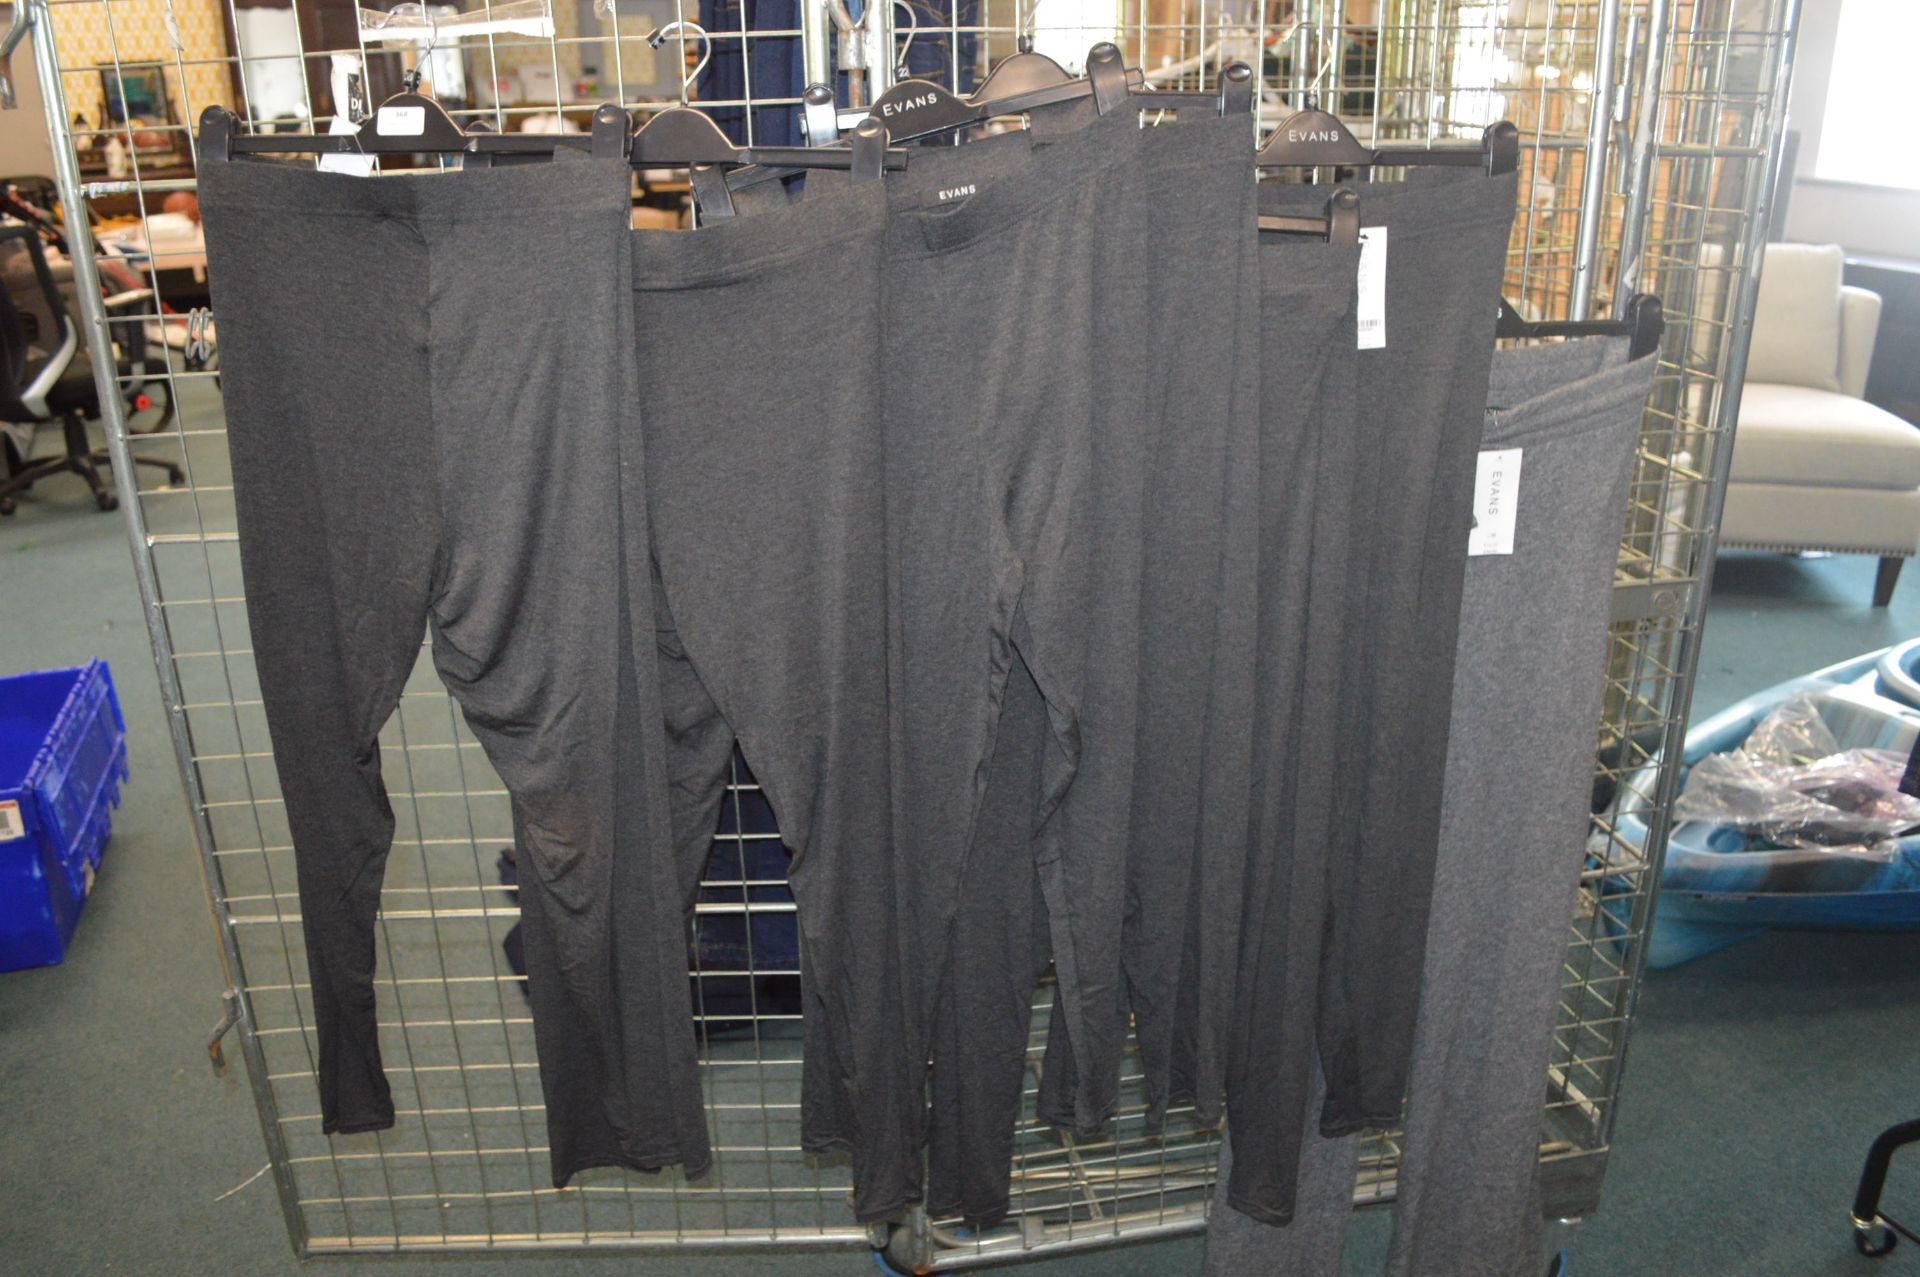 *Seven Pairs of Evans Grey Joggers (assorted sizes